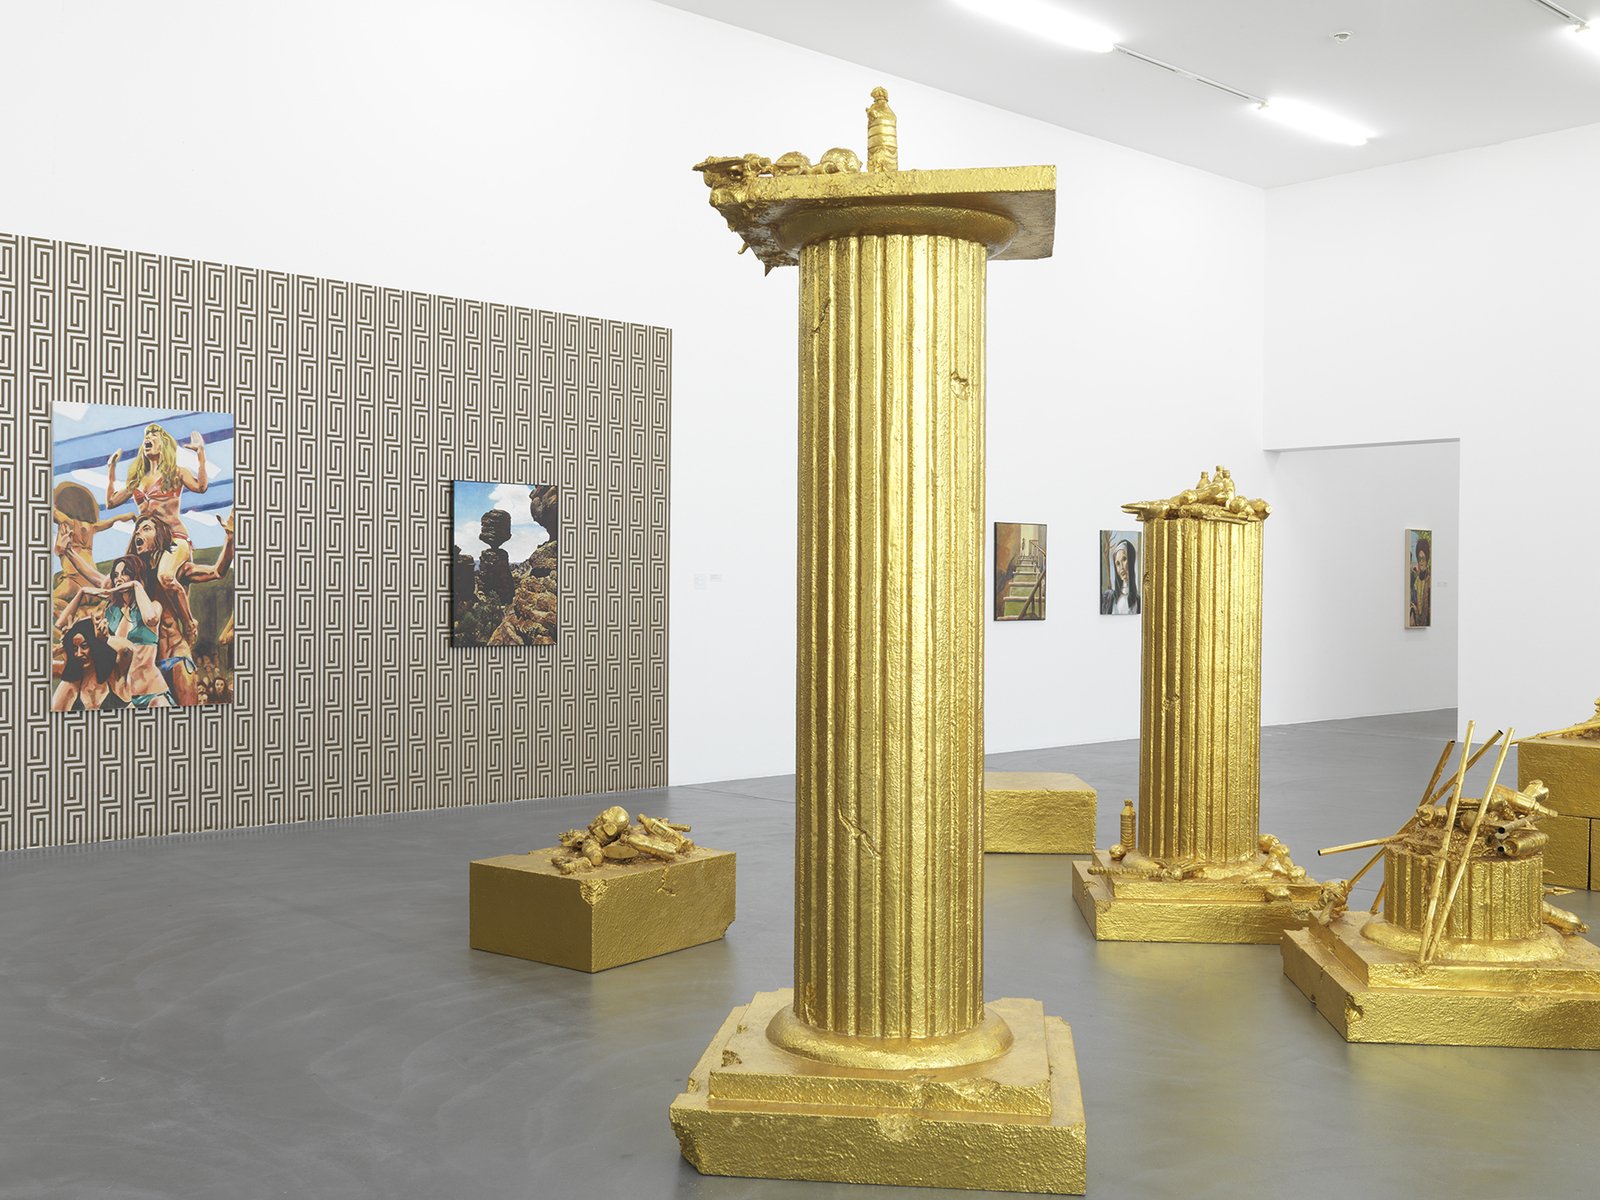 John Miller, A Refusal to Accept Limits, 2007. Imitation Gold Leaf on Various Materials Including Plastic Objects, Ropes, and Plaster on Fiberglass Forms. Rubell Family Collection, Miami, USA.